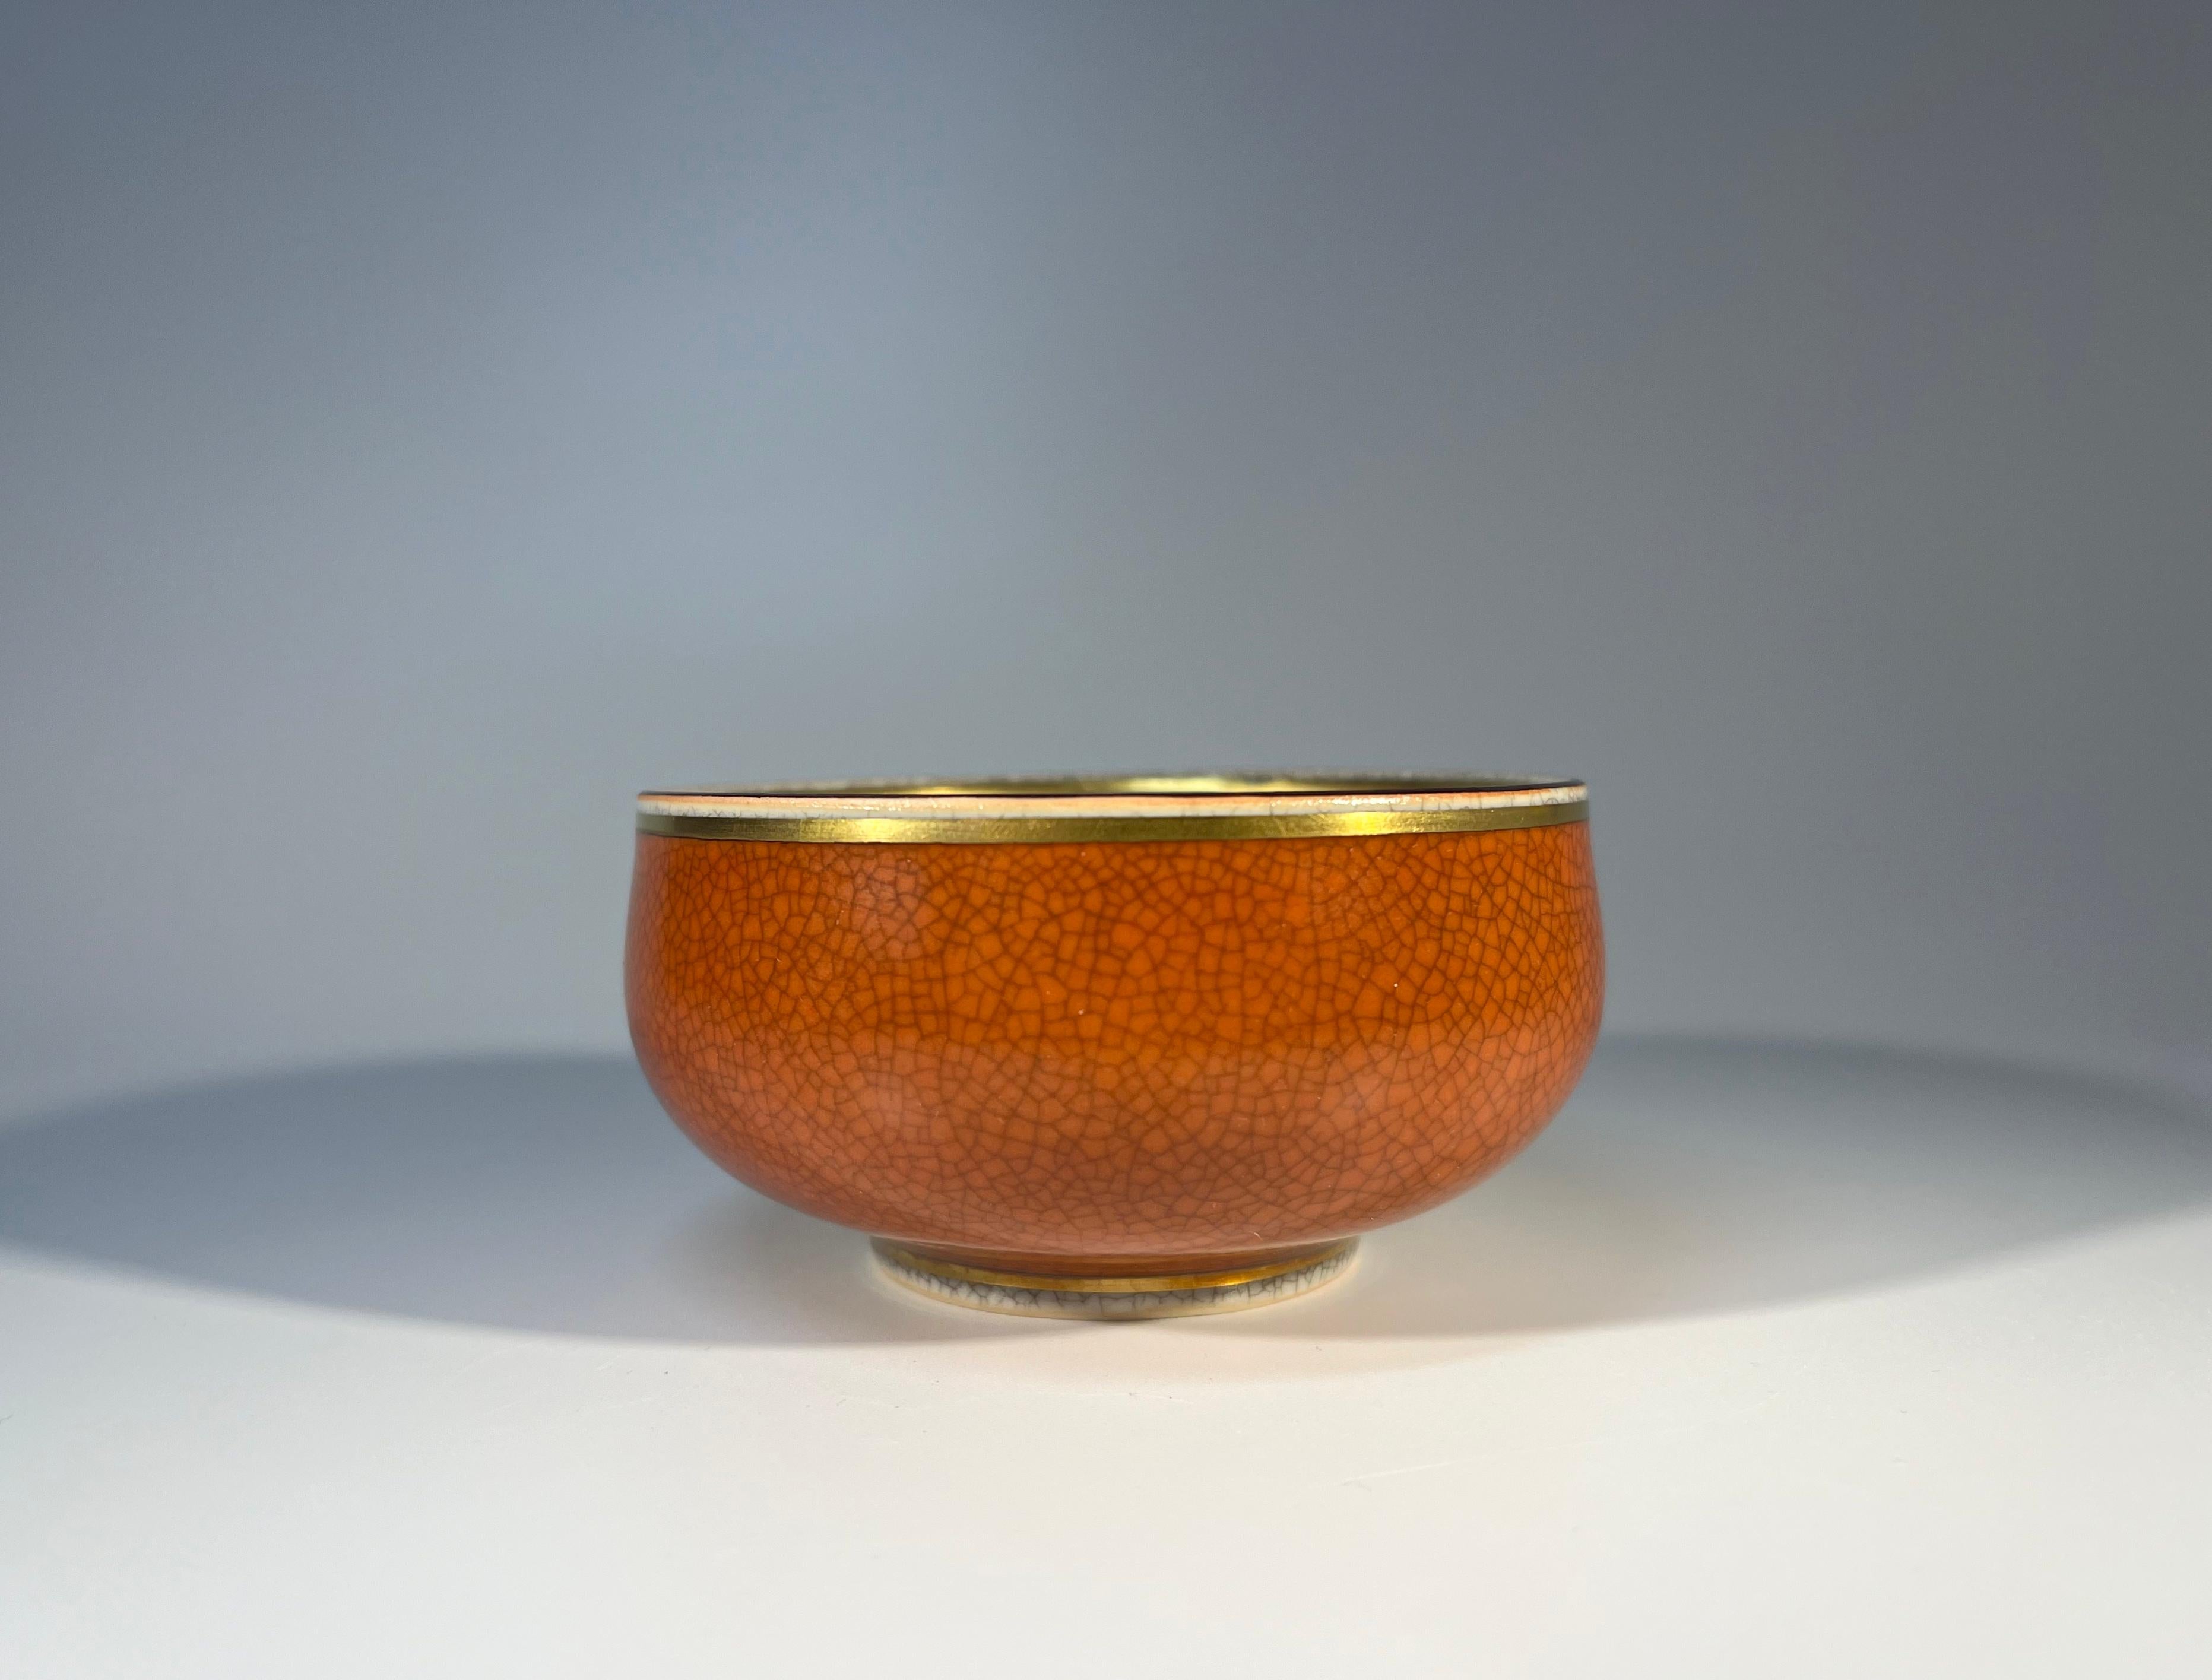 The crackle glaze is wonderfully emphasised on this small bowl by Thorkild Olsen for Royal Copenhagen
Rich terracotta and mid grey colouring with gilded banding - terrific combination
Circa 1960's
Stamped Denmark 2690
Height 2 inch, Diameter 3.5